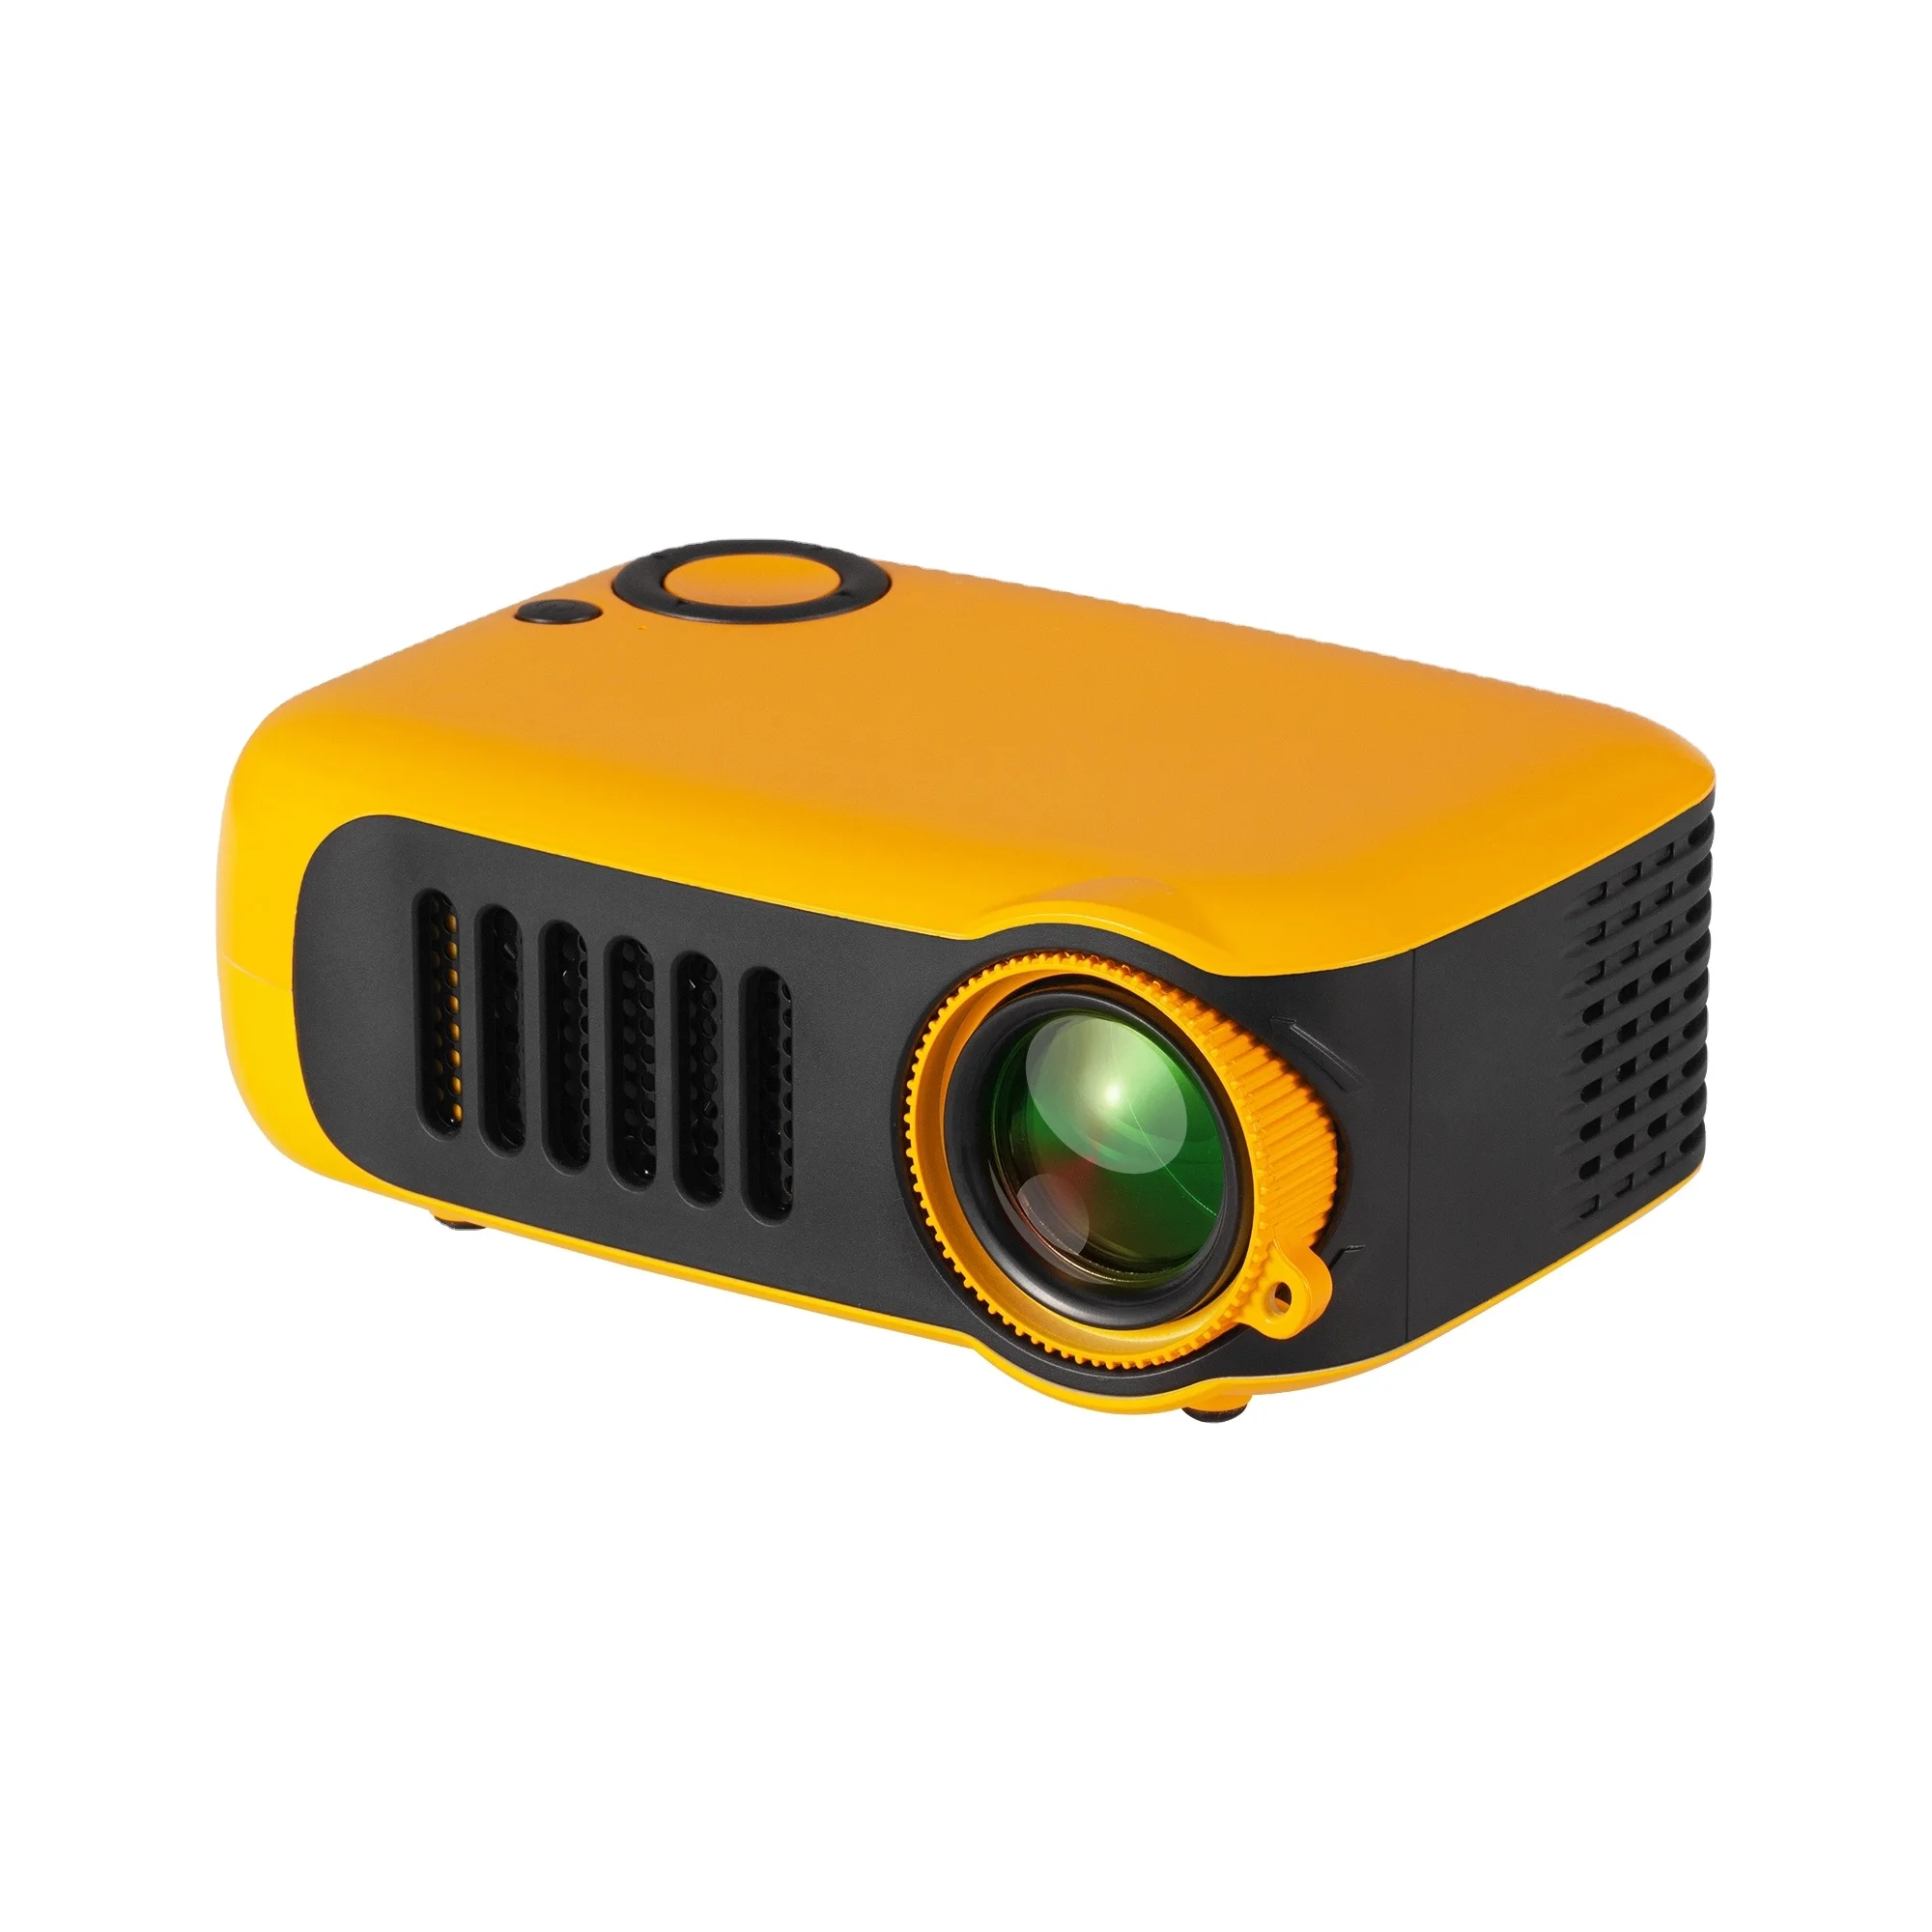 2020 Mini Projector 800 Lumens Portable Led Proyector Hd Home Theatre Beamer For Kids A2000 - Projectors,Mini Proyector Cheap Mini Projector,Portable Projector Mini Projector For Kids Product on Alibaba.com